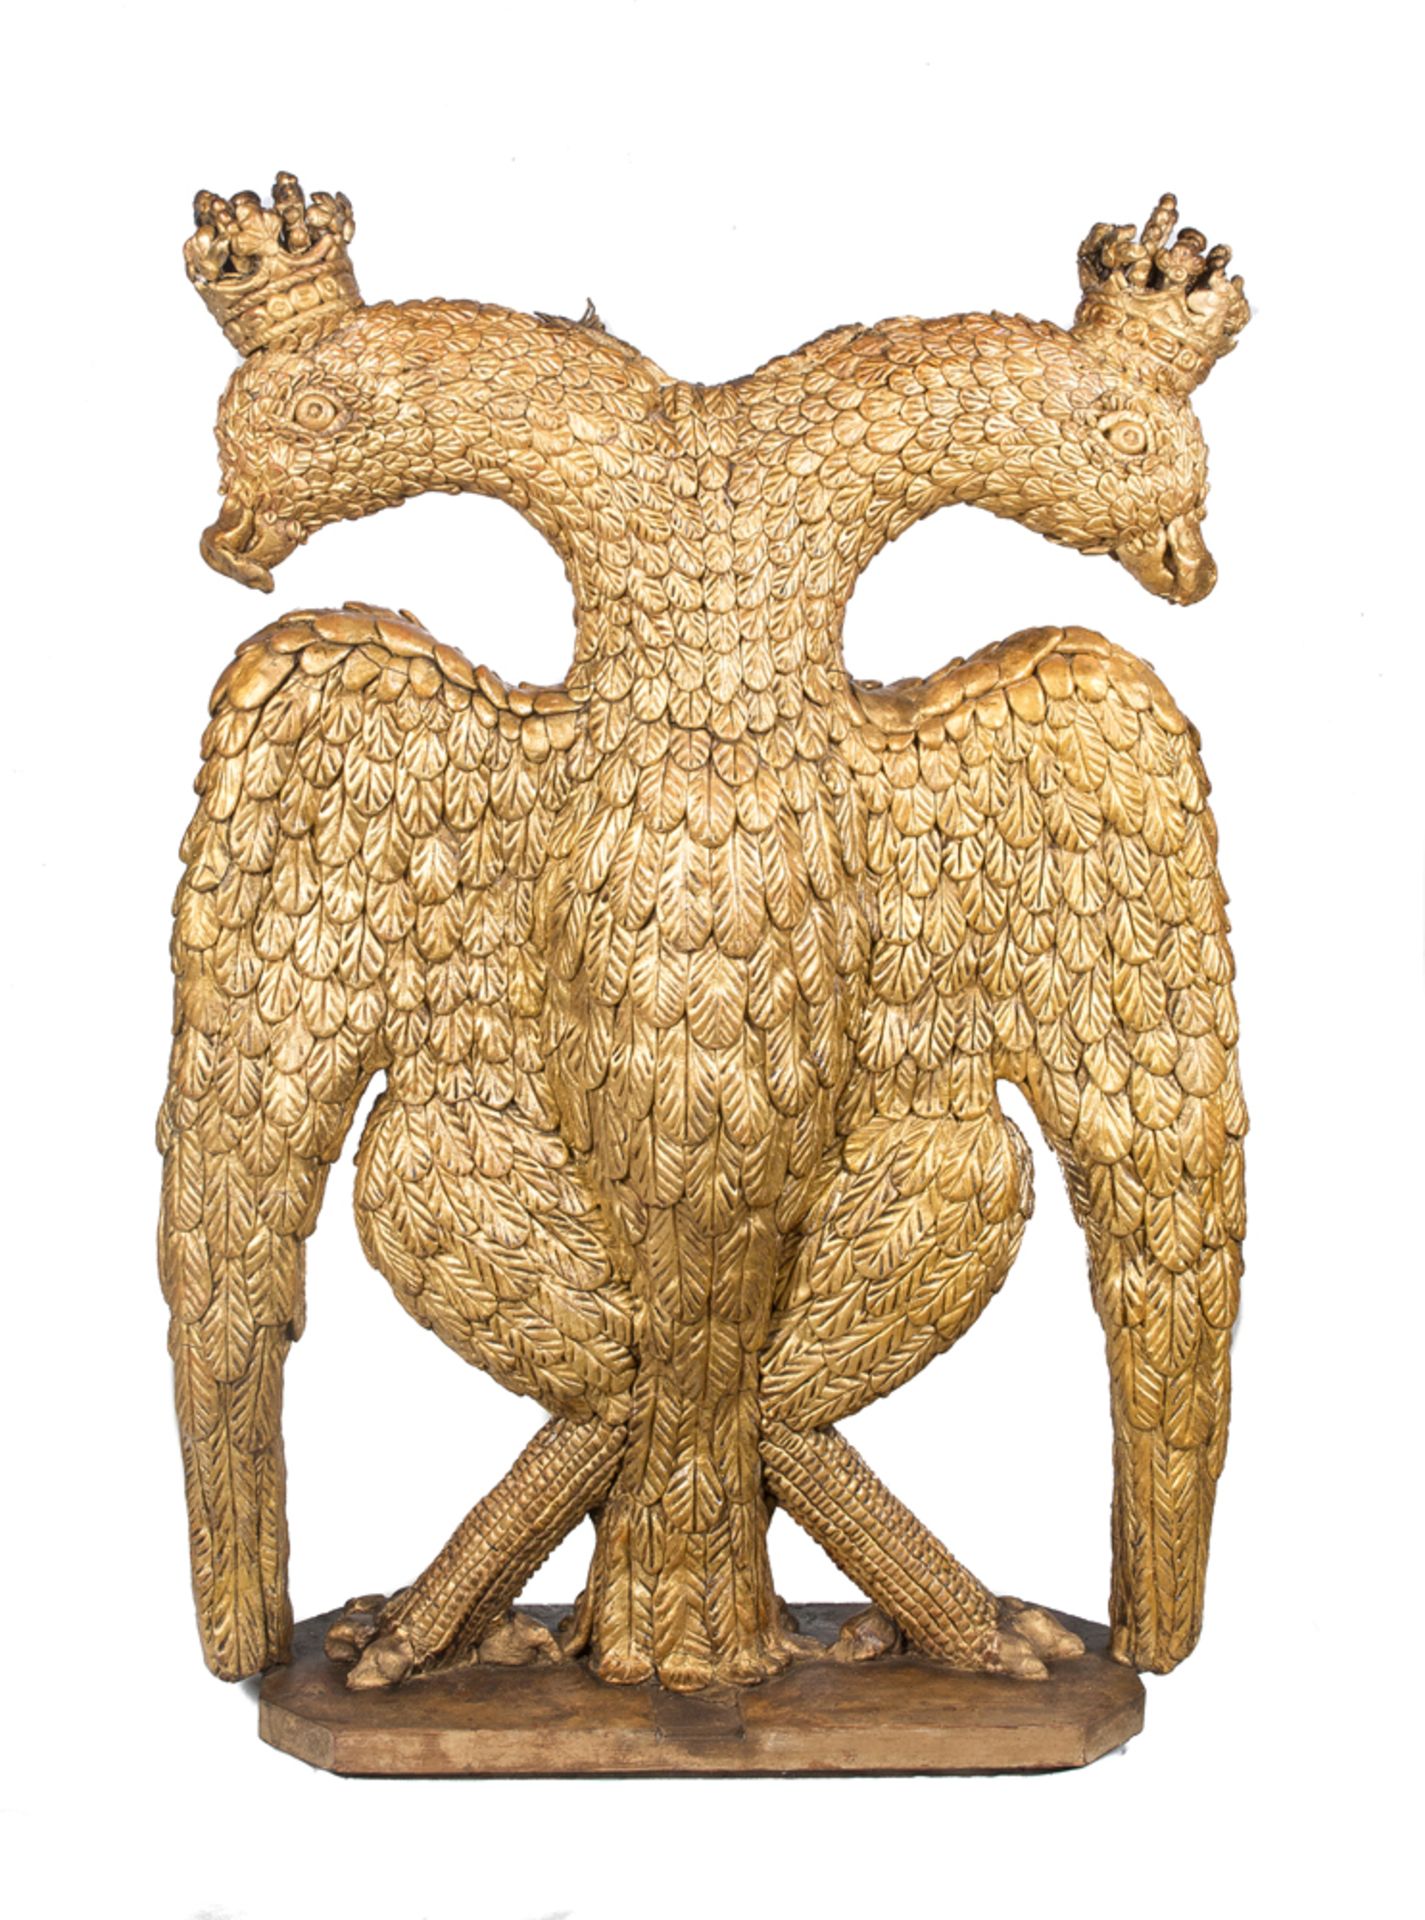 "Double-headed eagle". Large carved and gilded sculpture. 18th century.